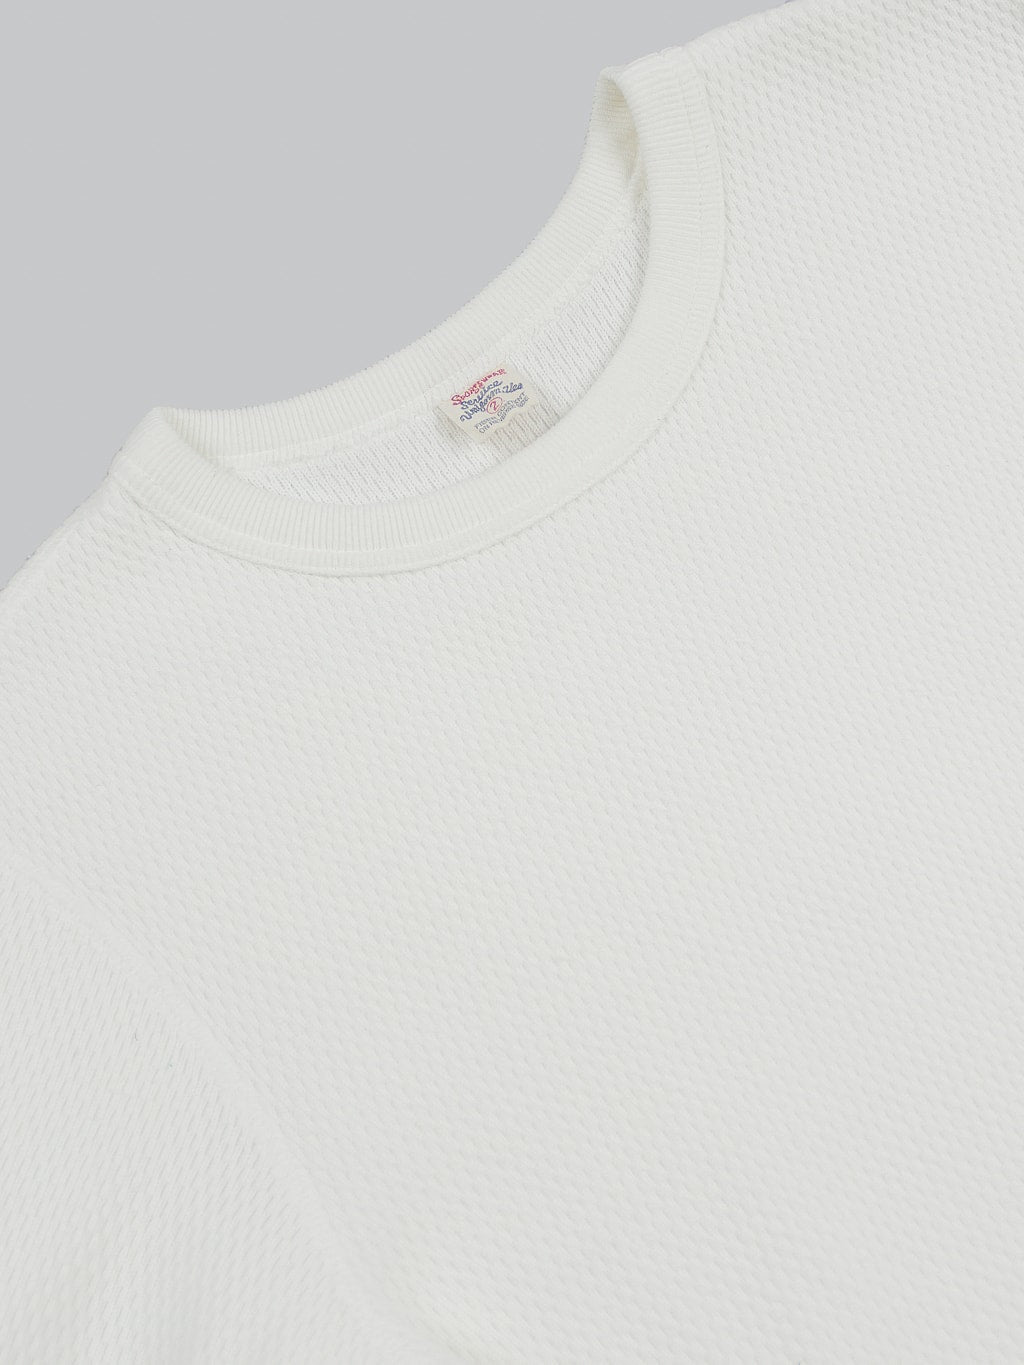 UES Double Honeycomb Thermal tshirt Off White collar